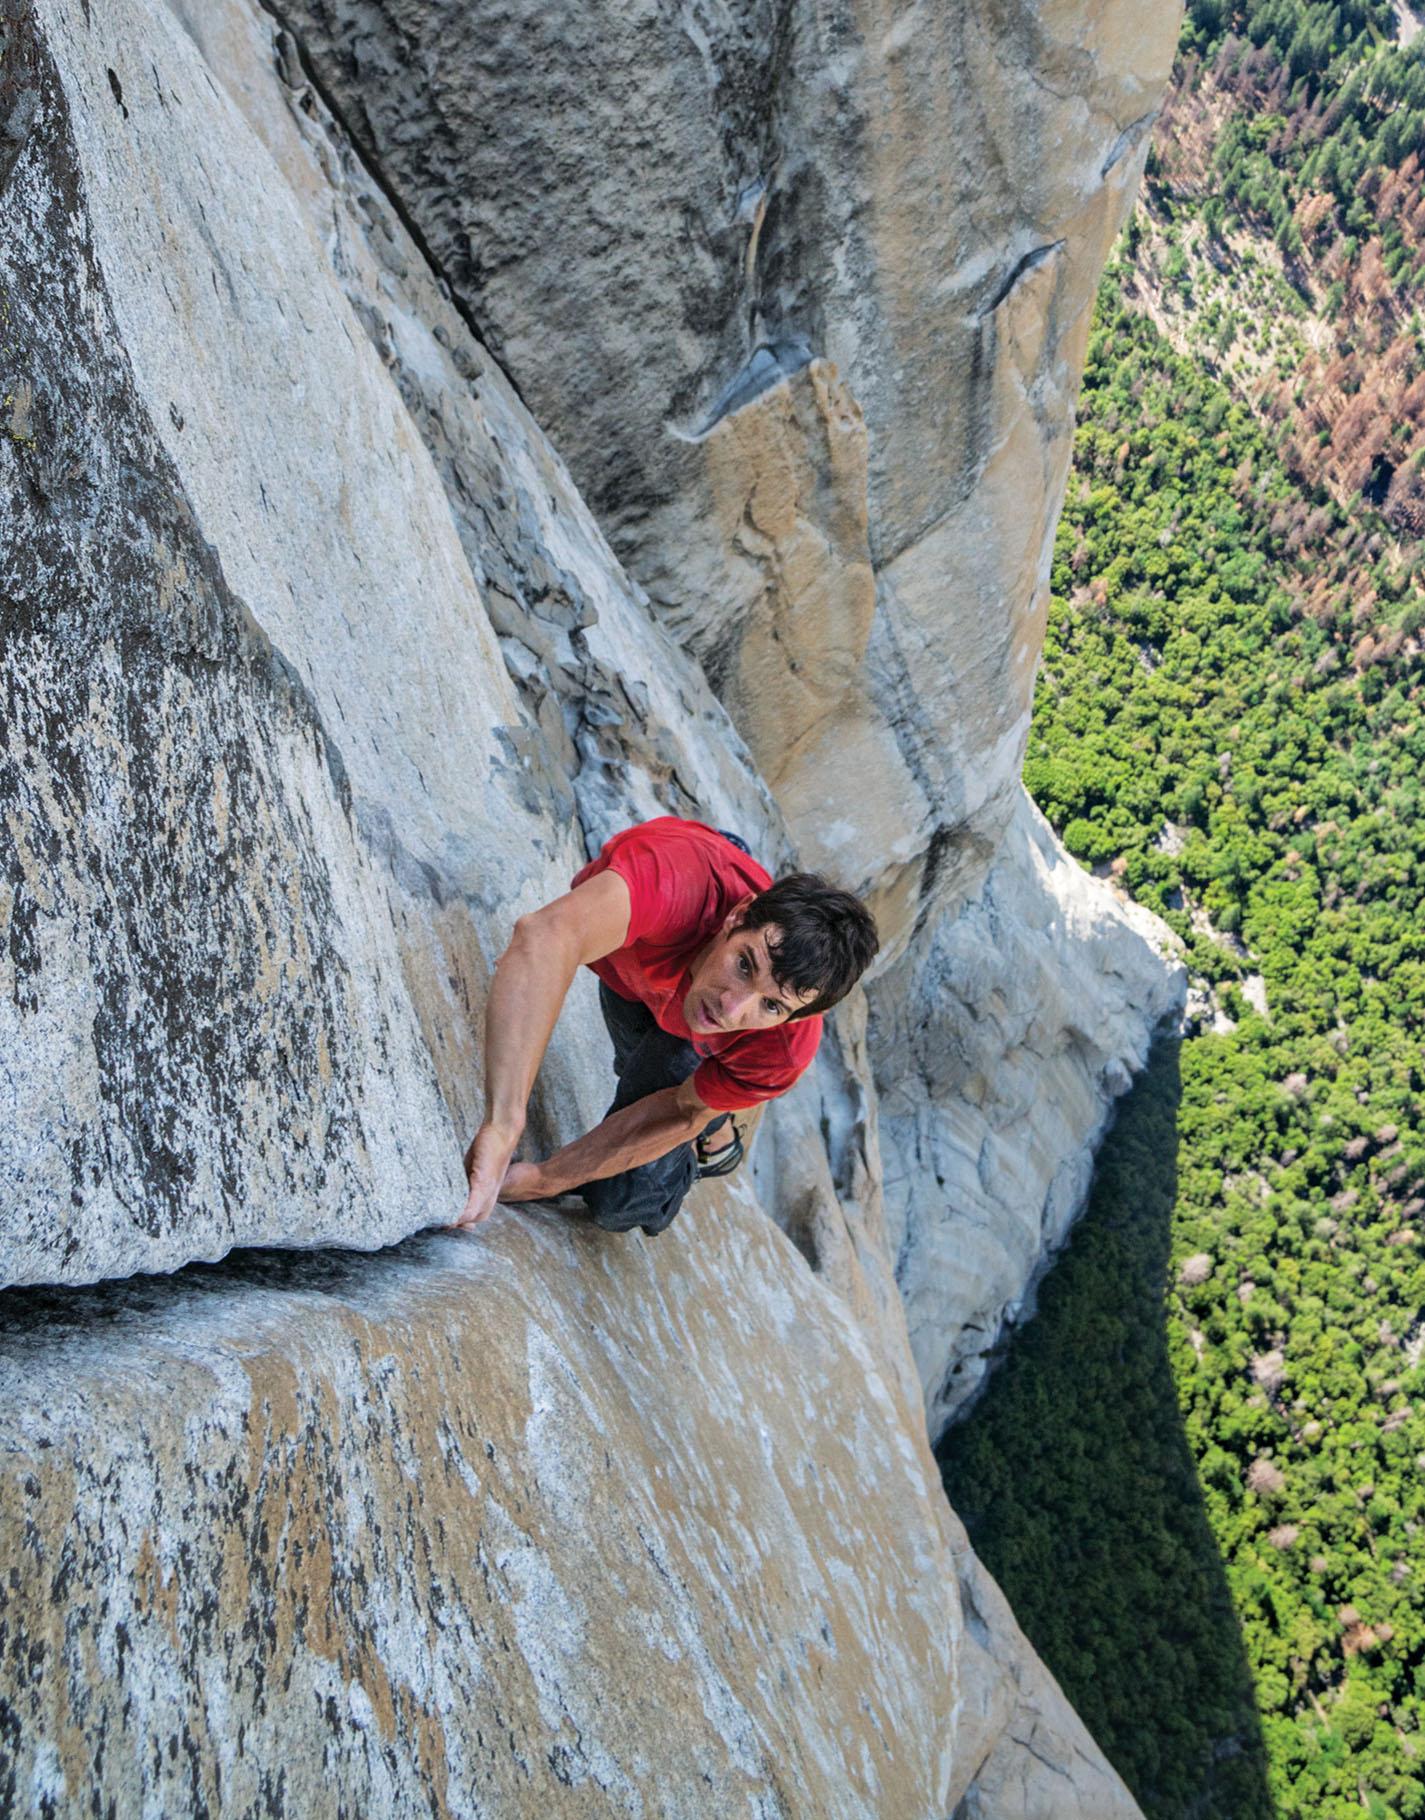 Alex Honnold Filmed in National Geographic's 'Free Solo' Movie